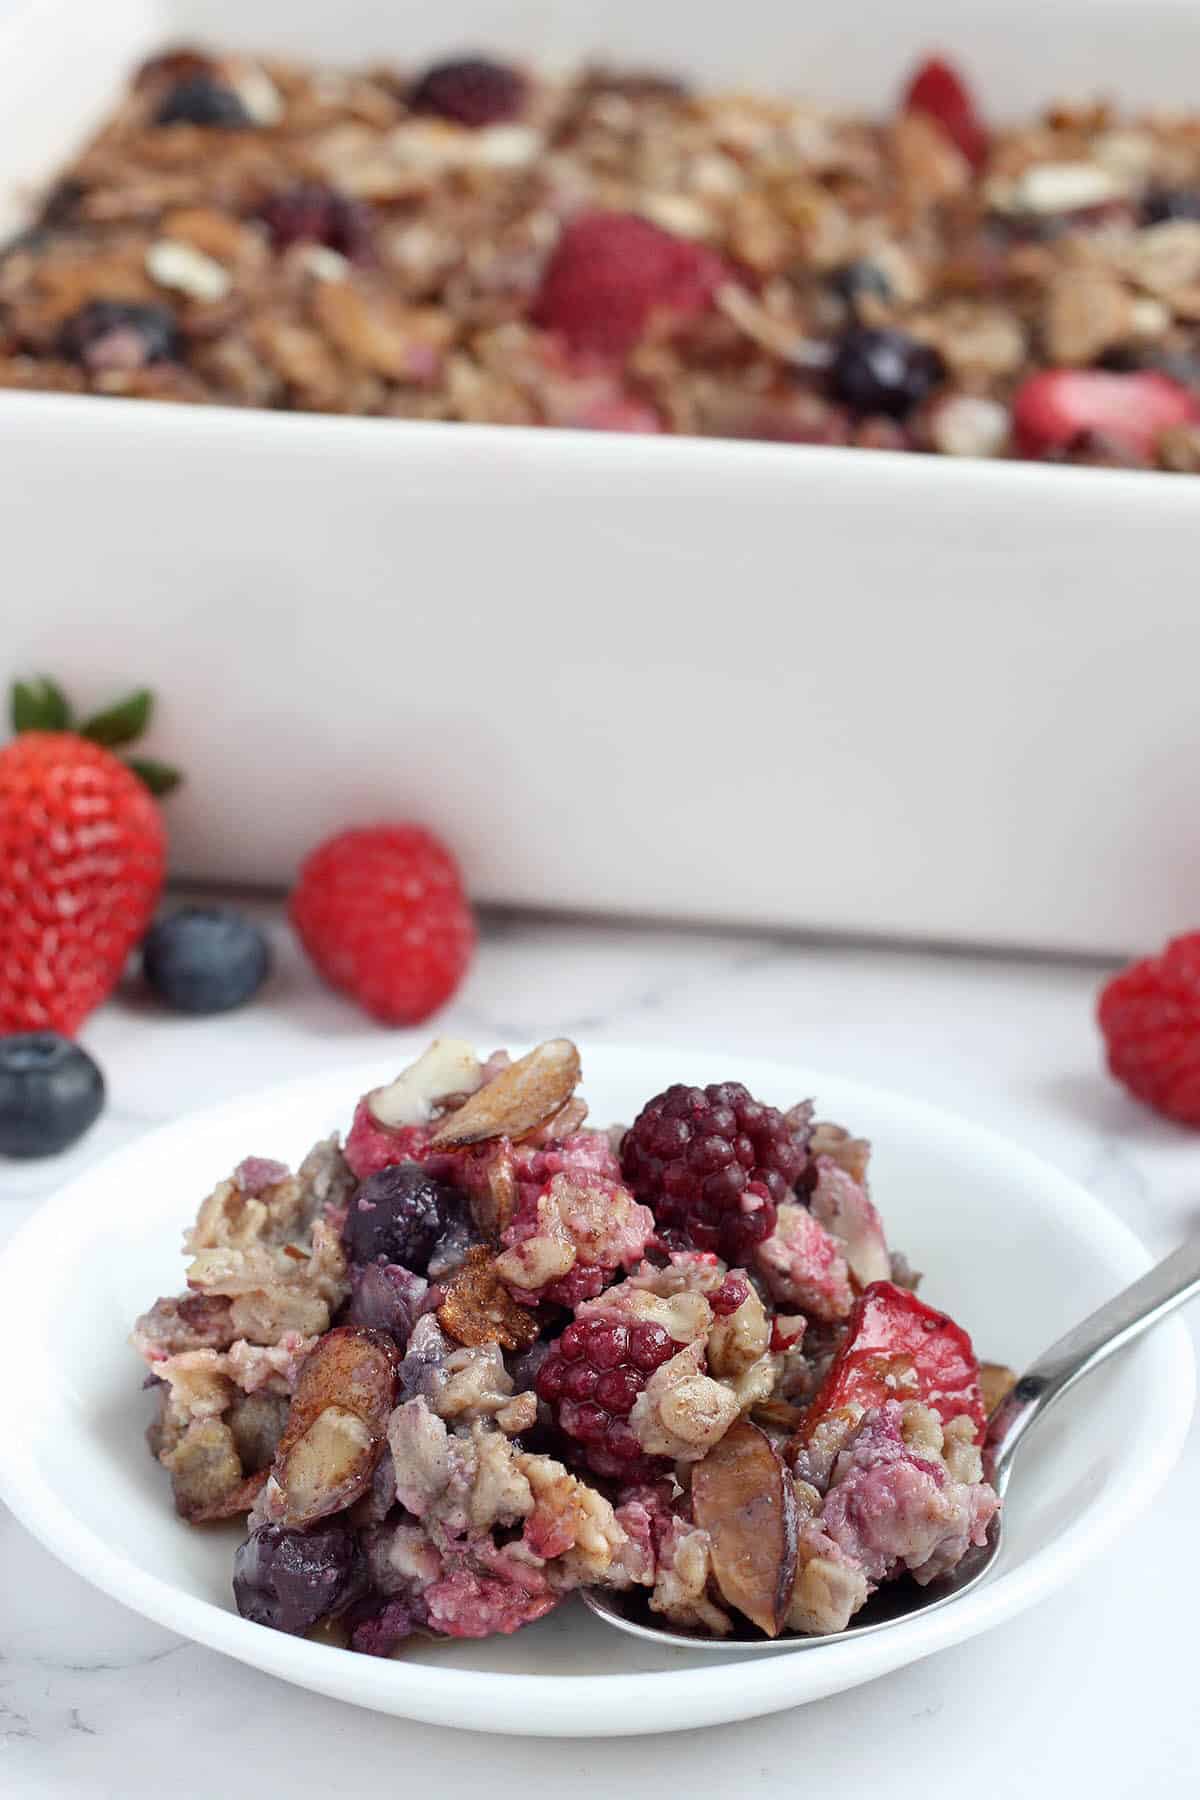 a serving of baked oatmeal with berries on a white plate with a spoon